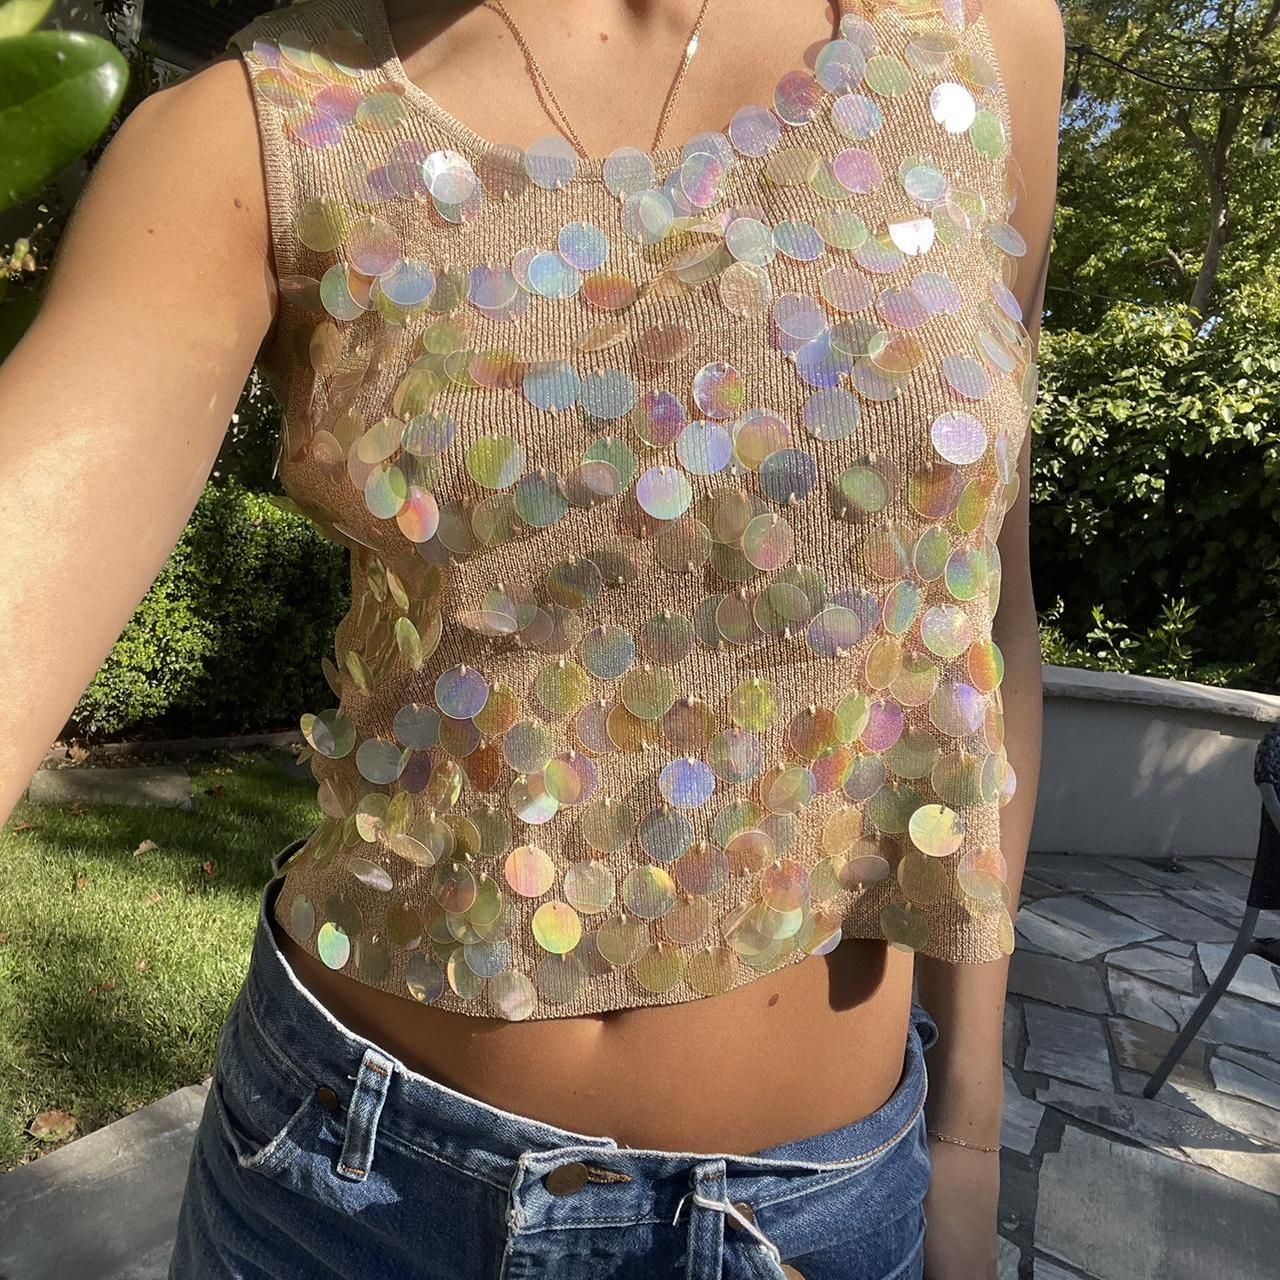 How to Style Sequin Tank Top: 15 Super Chic Outfit Ideas